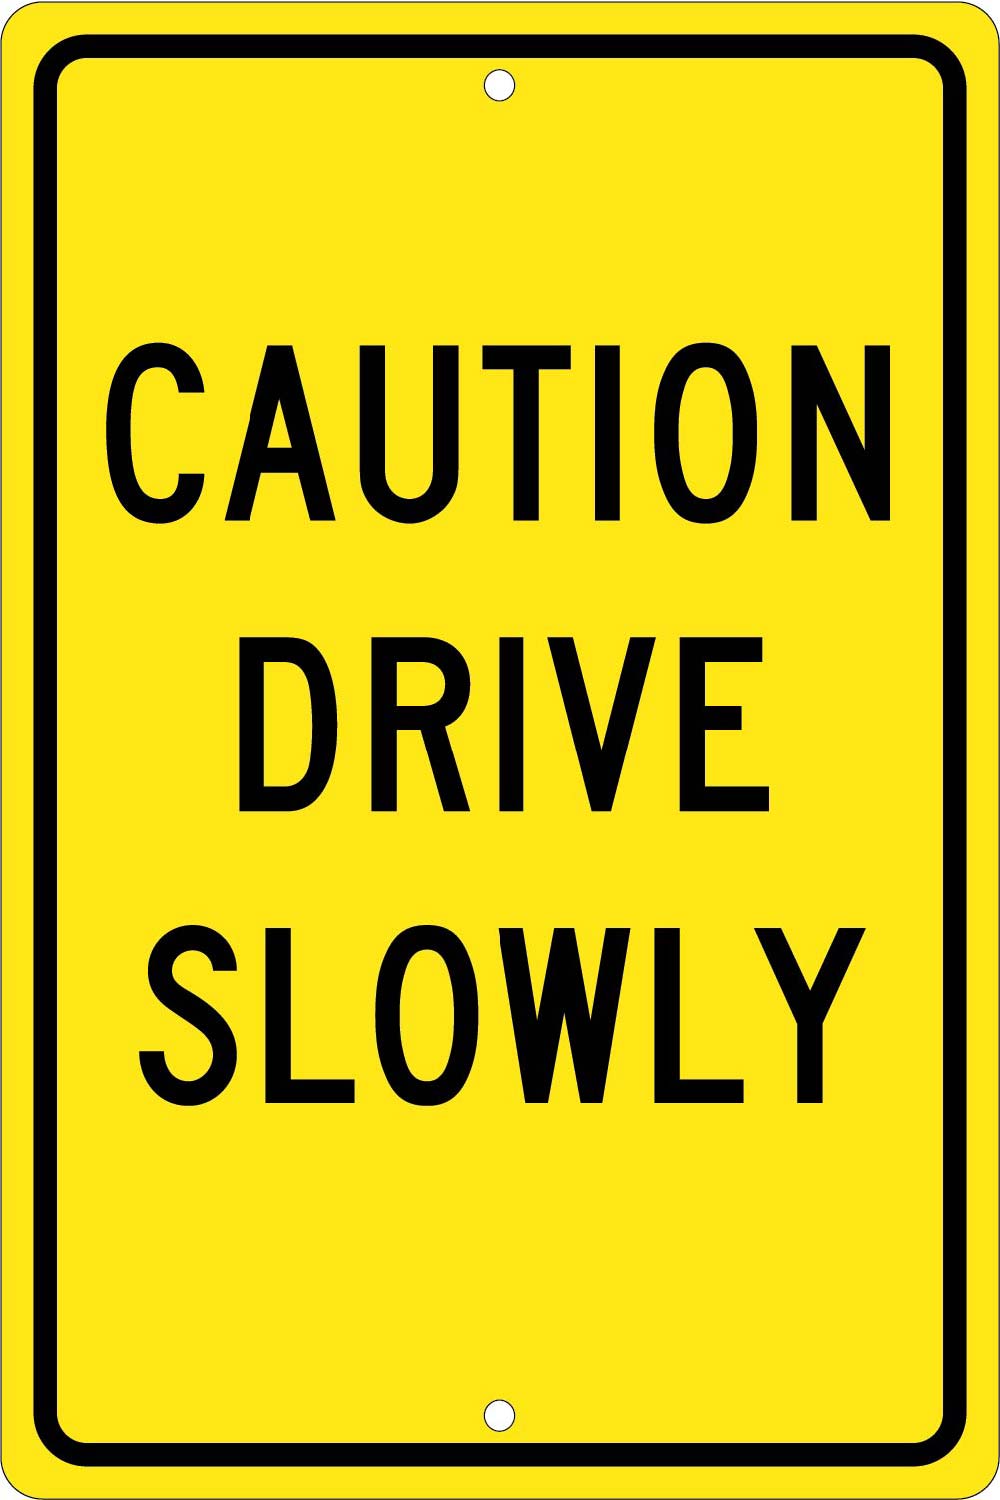 Caution Drive Slowly Sign-eSafety Supplies, Inc